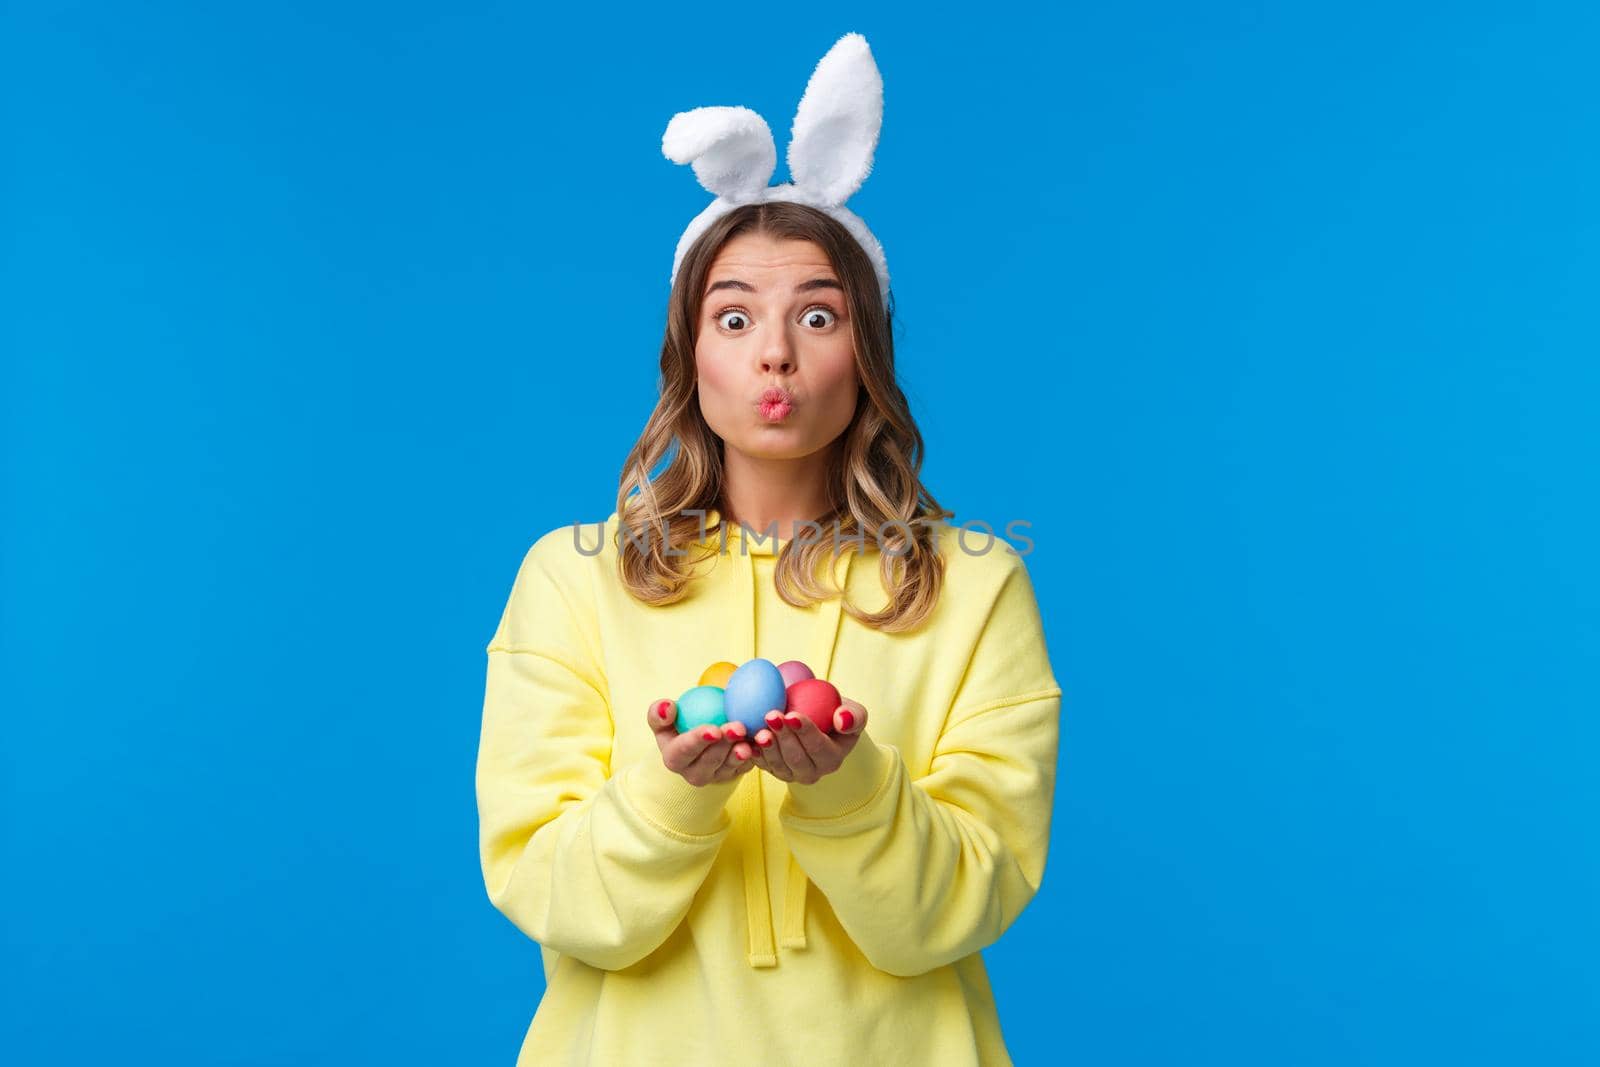 Holidays, traditions and celebration concept. Silly cute caucasian blond girl present you Easter eggs, painted it for holiday, show mwah kiss expression and wear rabbit ears, blue background.